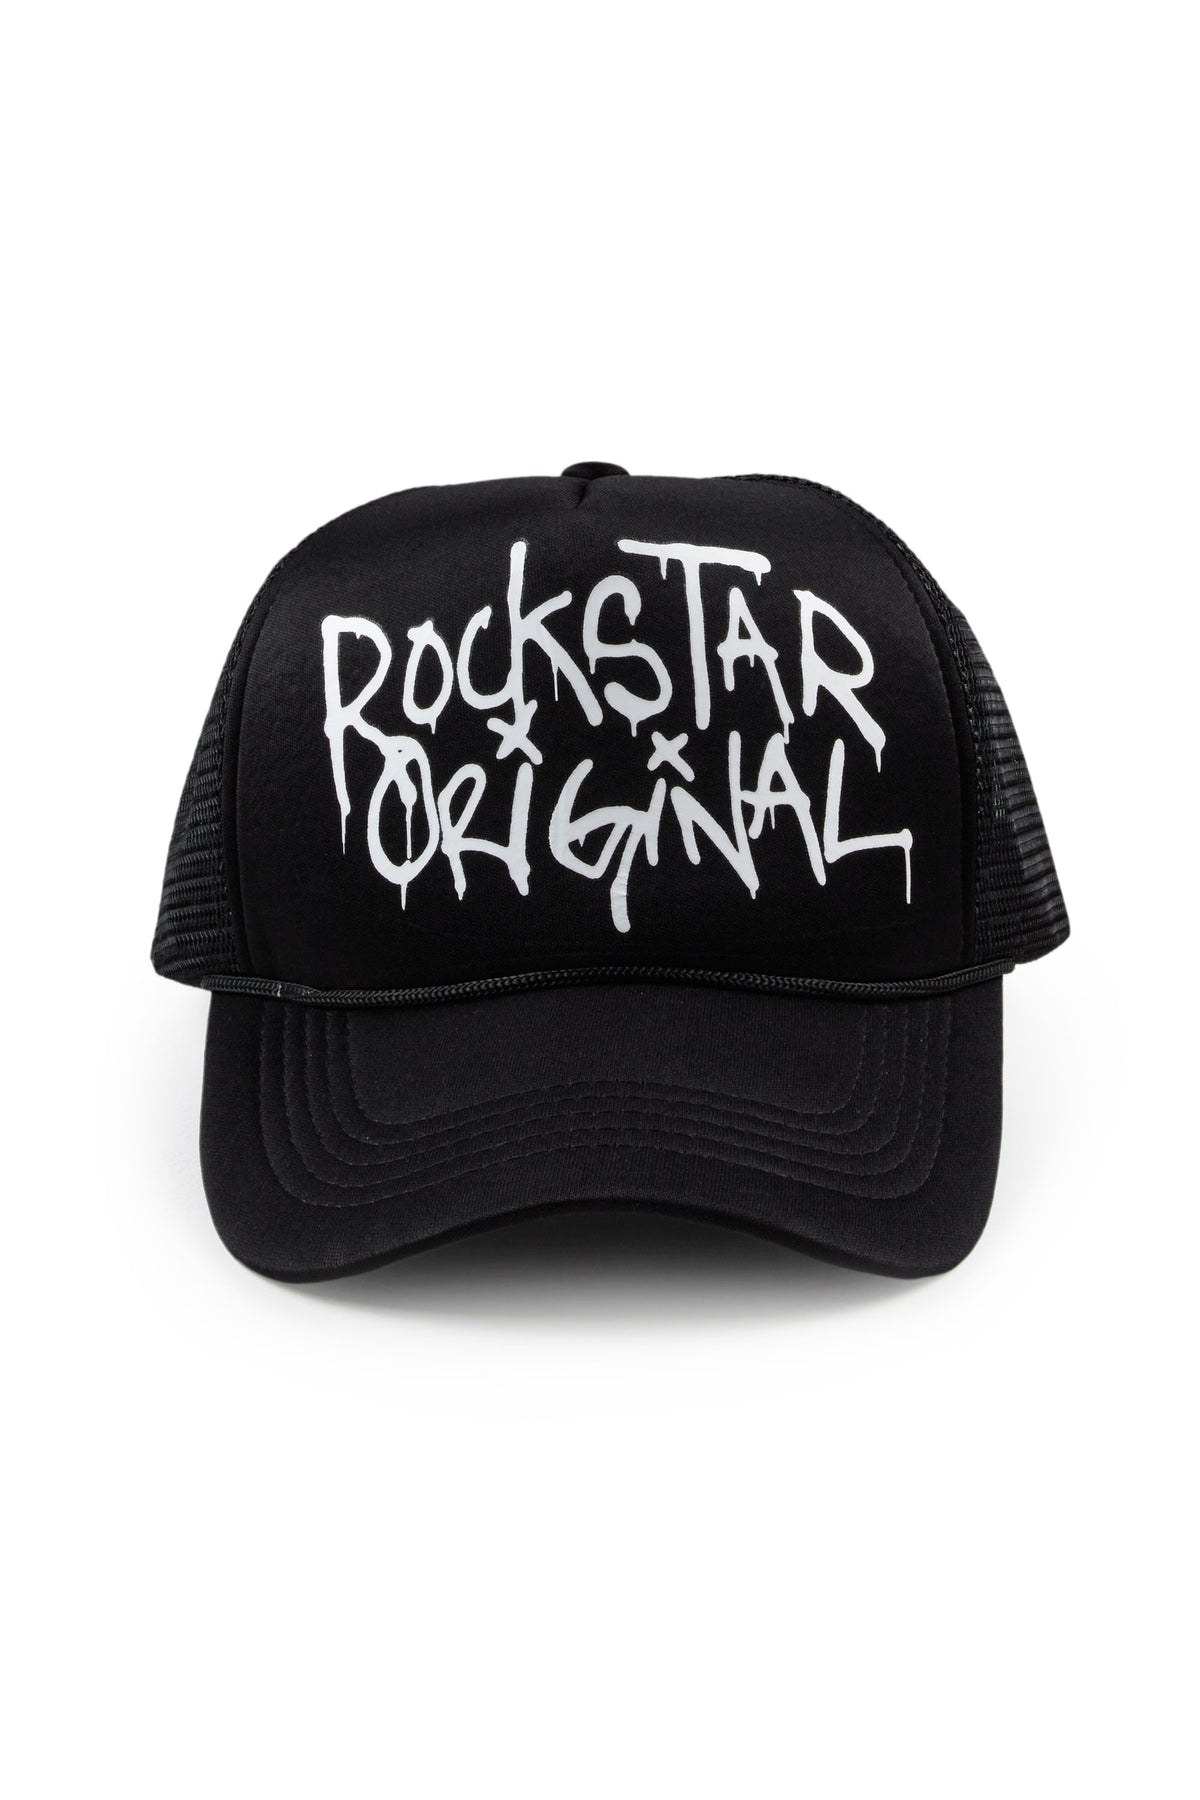 https://www.rockstaroriginals.shop/wp-content/uploads/1692/03/enjoy-big-discounts-on-adelina-black-trucker-hat-womens-accessories-the-top-products-are-offered-at-the-lowest-prices-and-with-outstanding-service_0.jpg